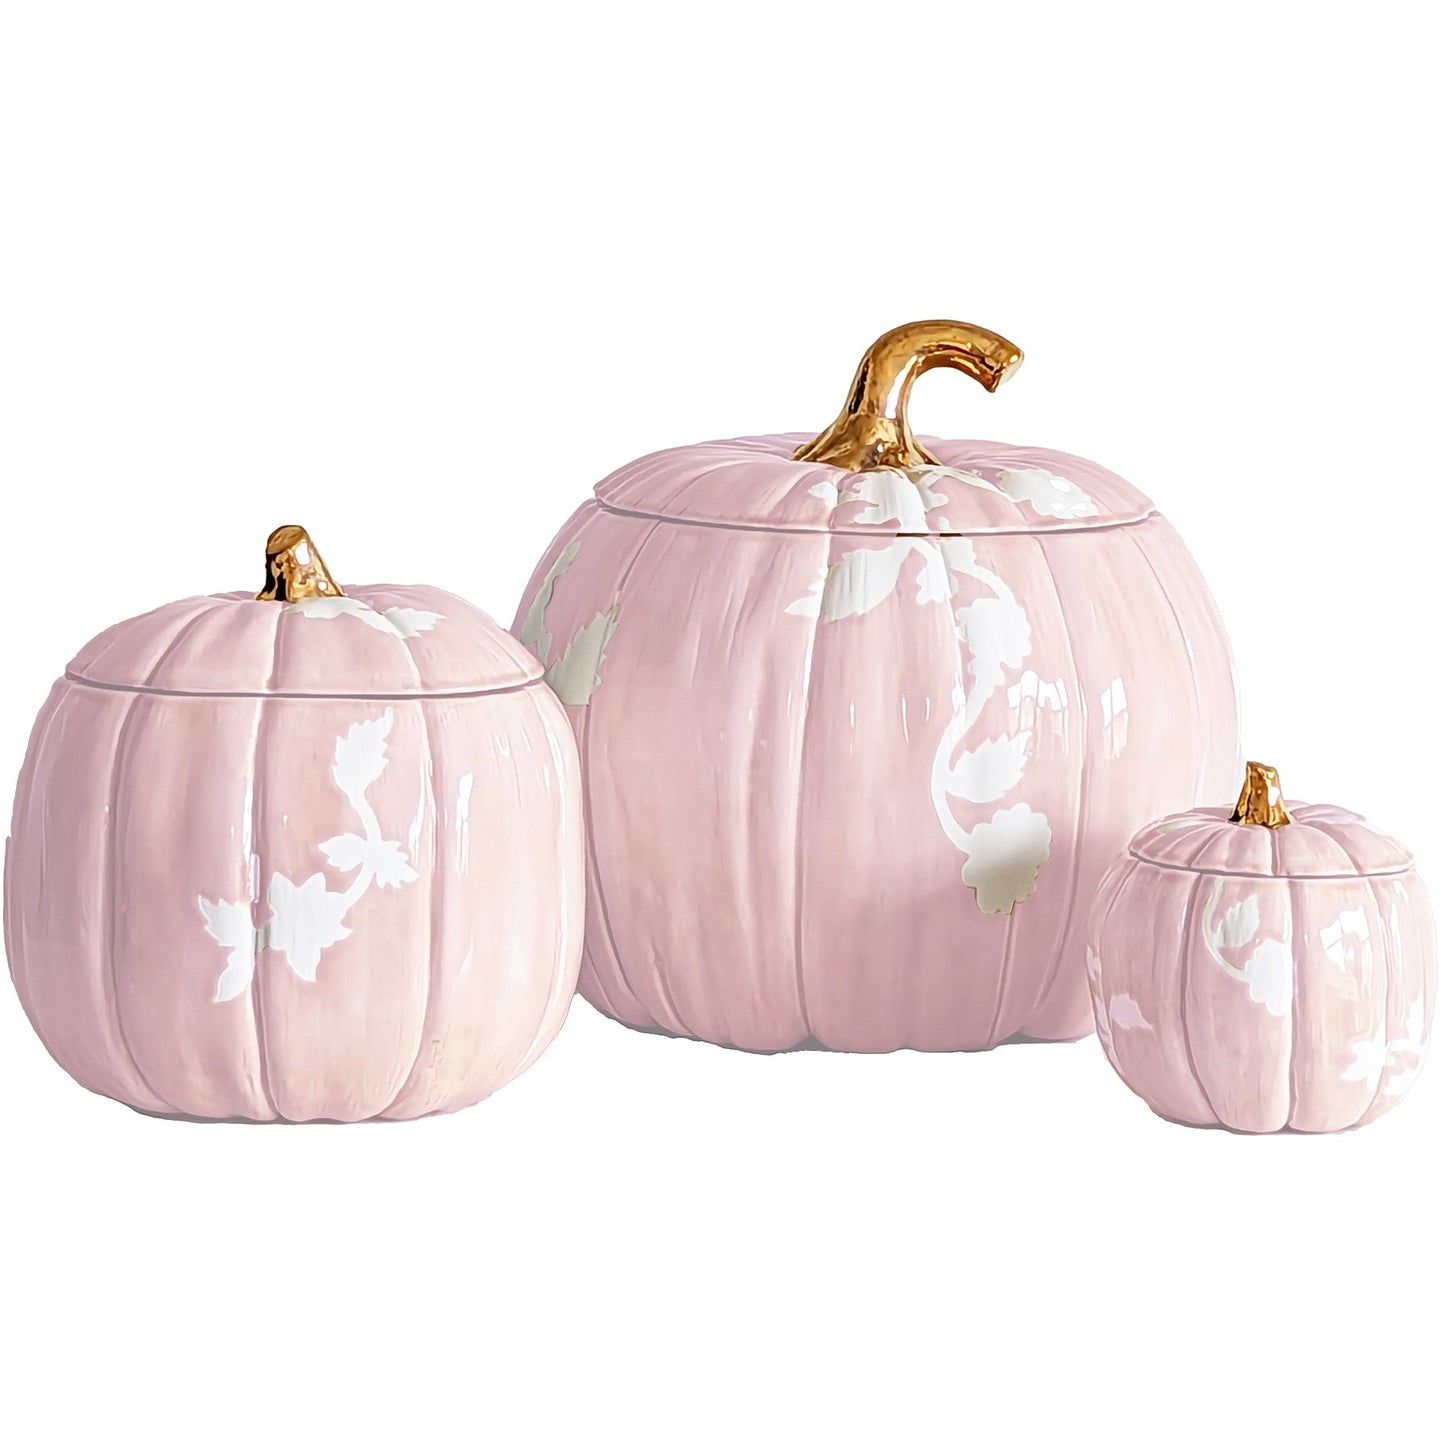 Chinoiserie Pumpkin Jars with 22K Gold Accents in Light Pink